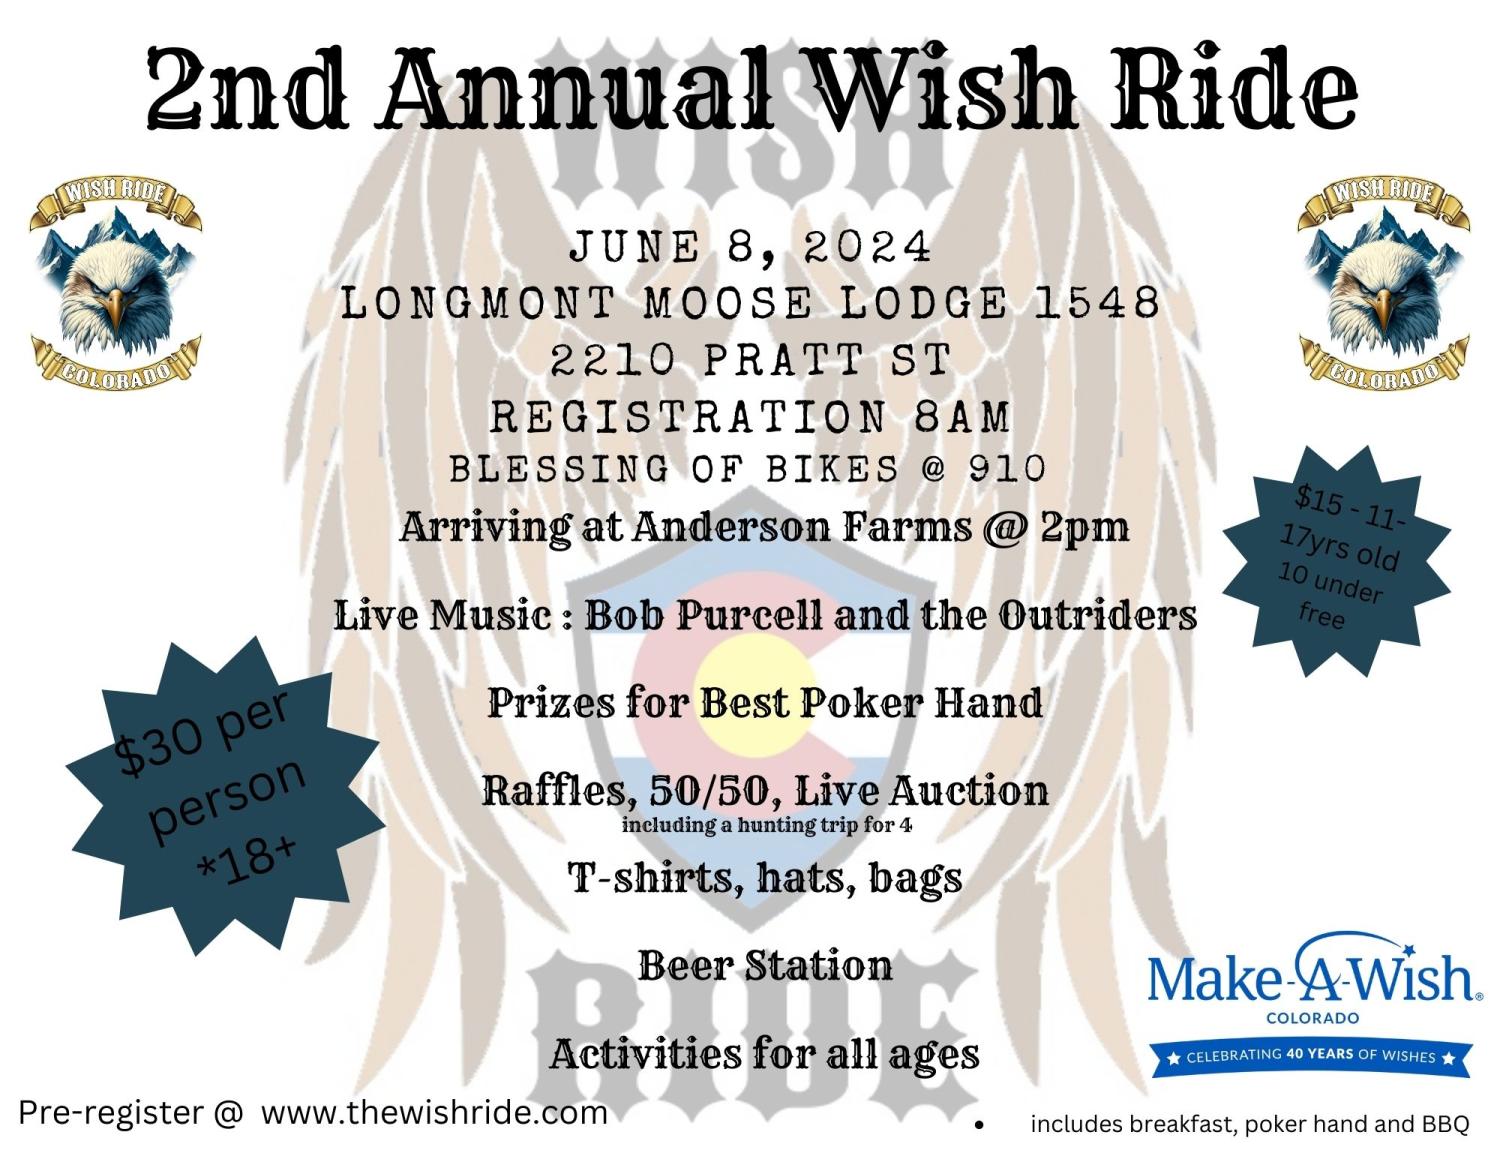 2nd Annual Wish Ride for Make-a-Wish